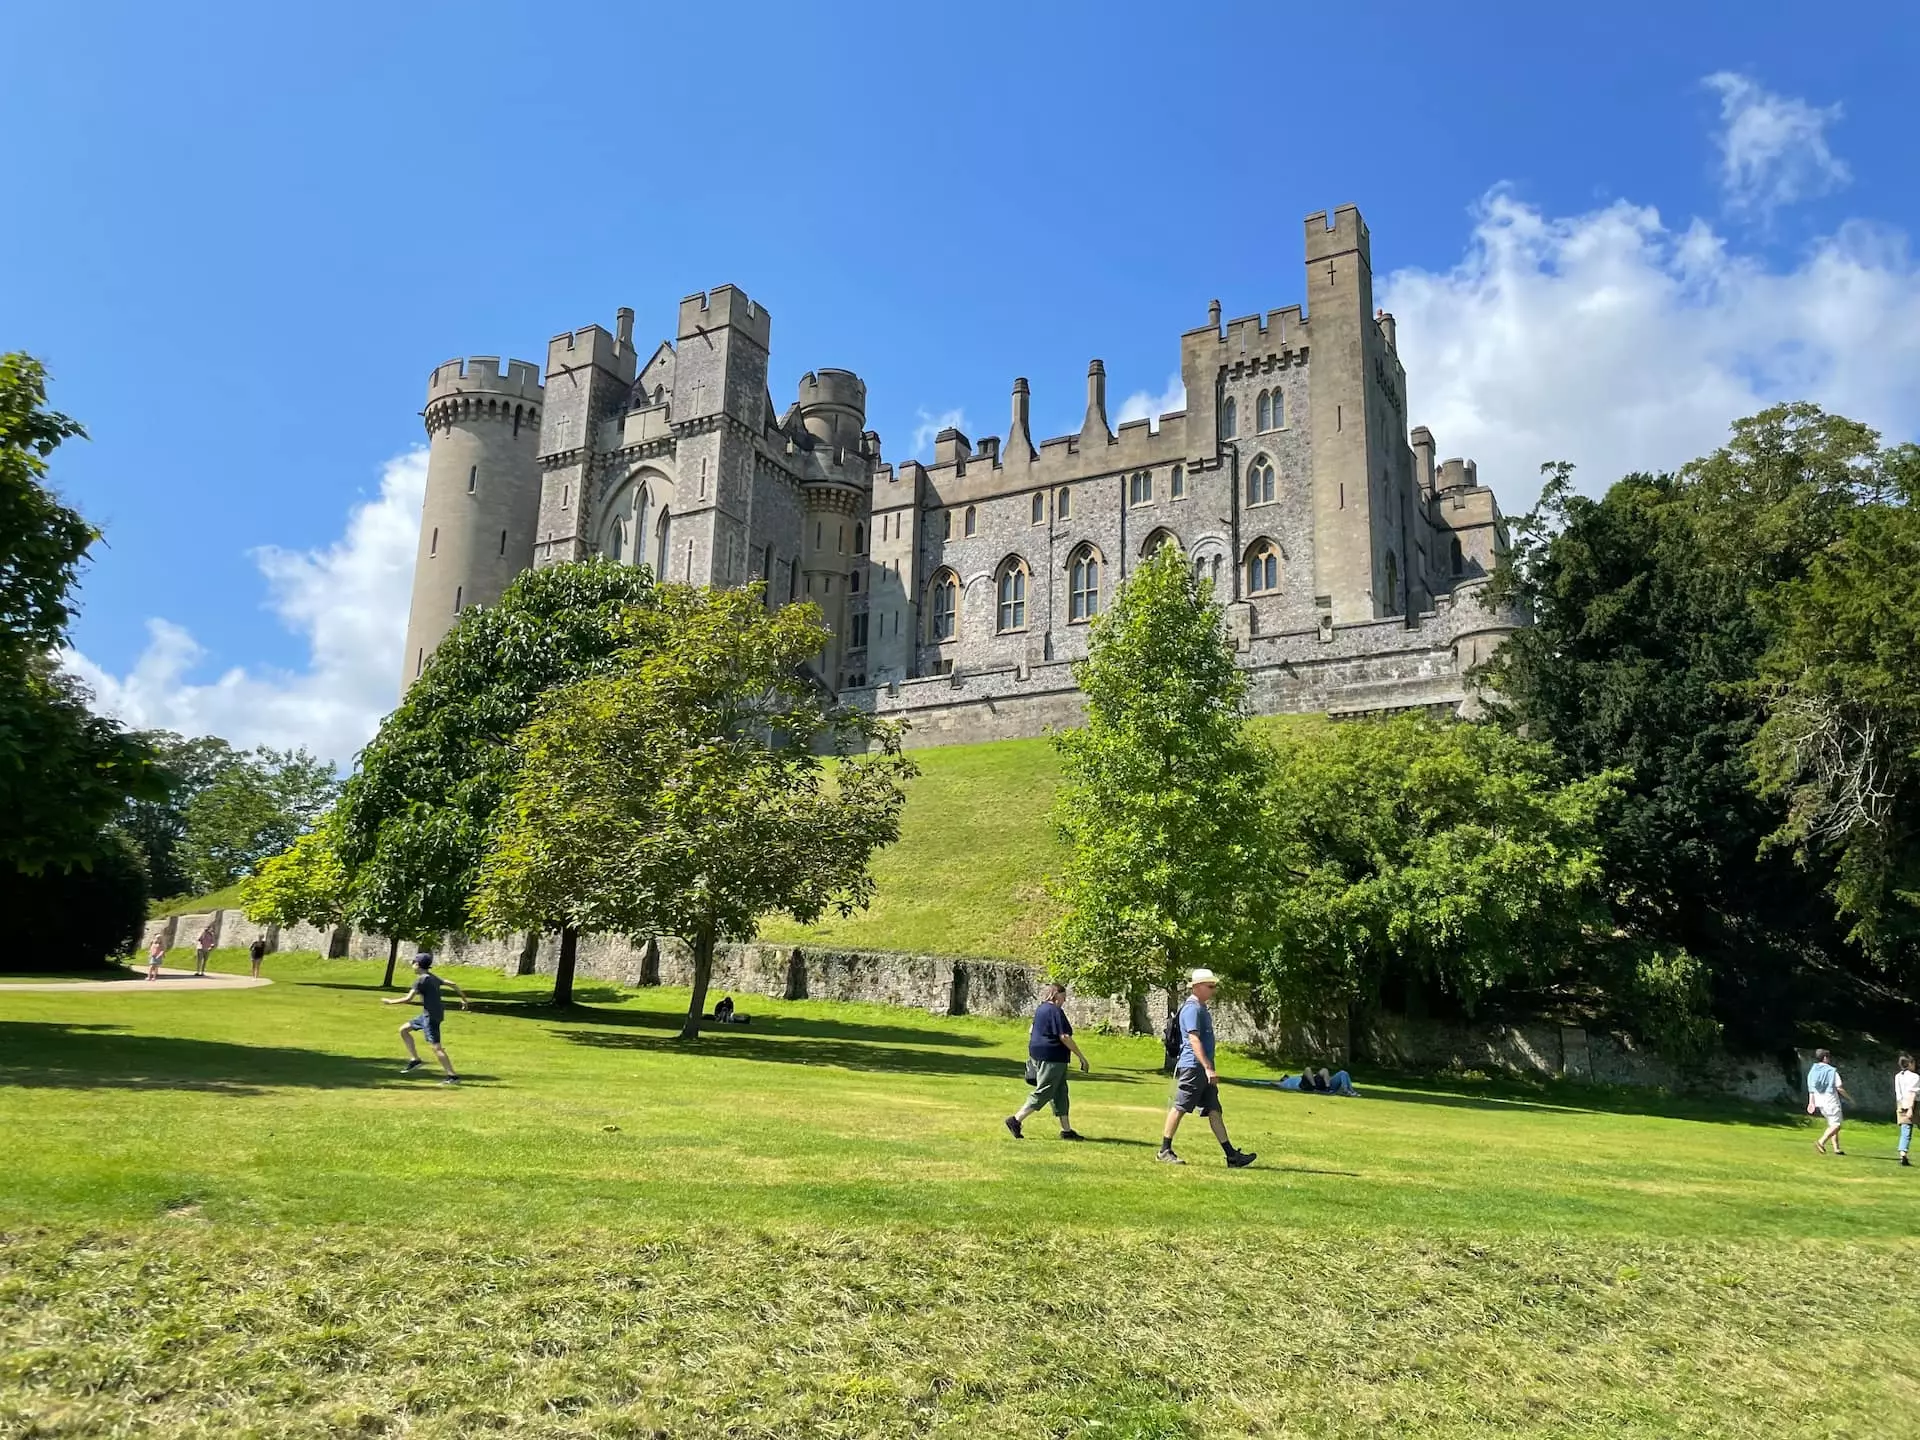 people walking on a grassy hill with a castle in the background